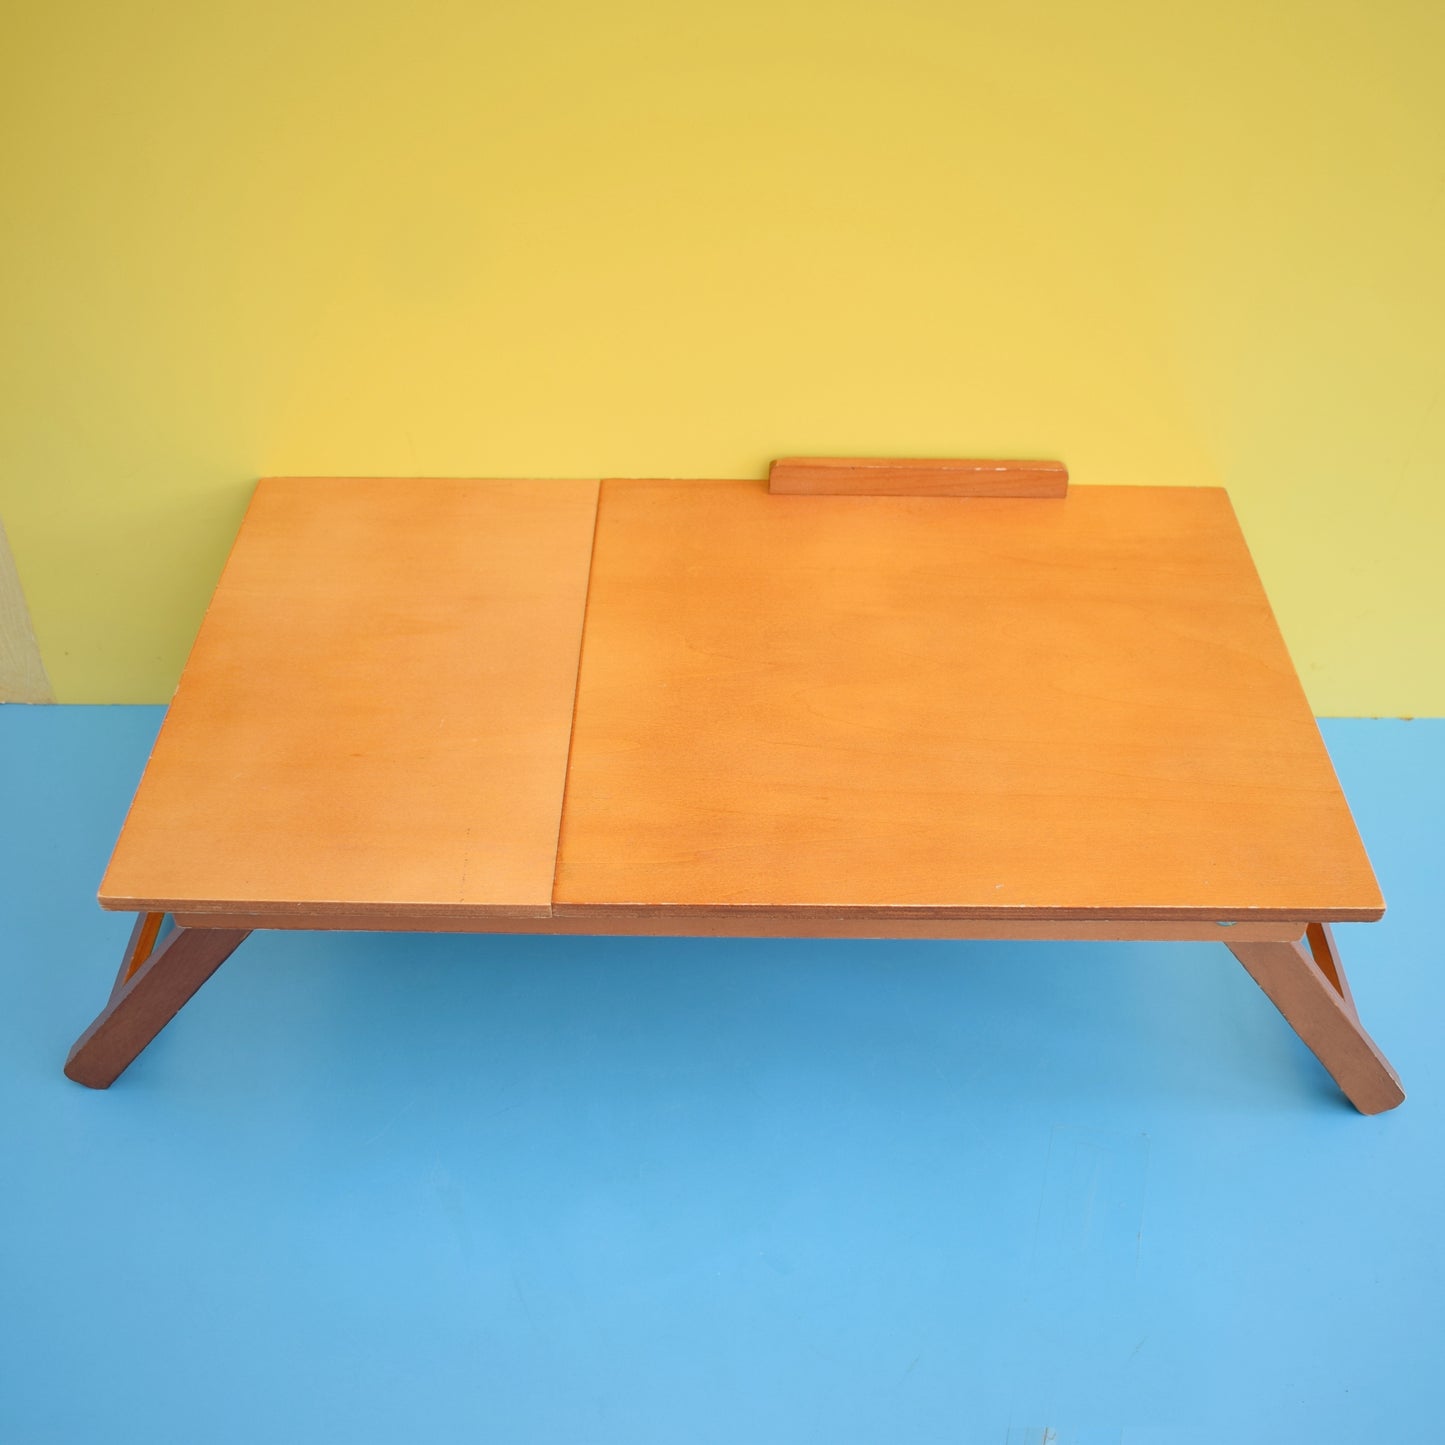 Vintage 1970s Tilting Lap Tray Table - Wooden